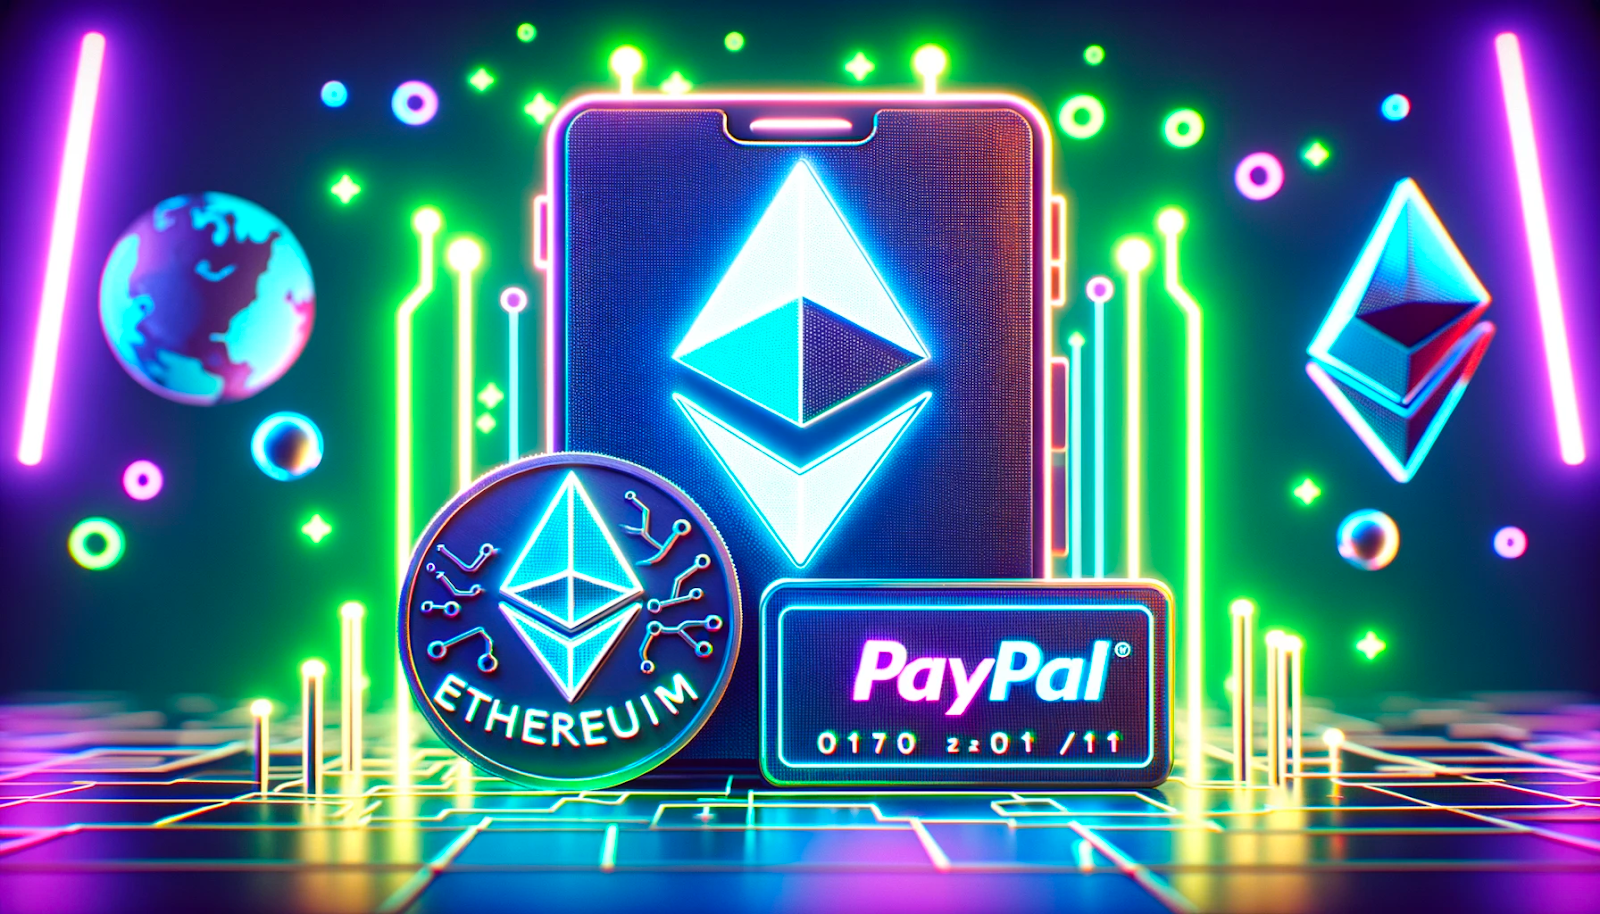 How Can You Buy Ethereum With PayPal